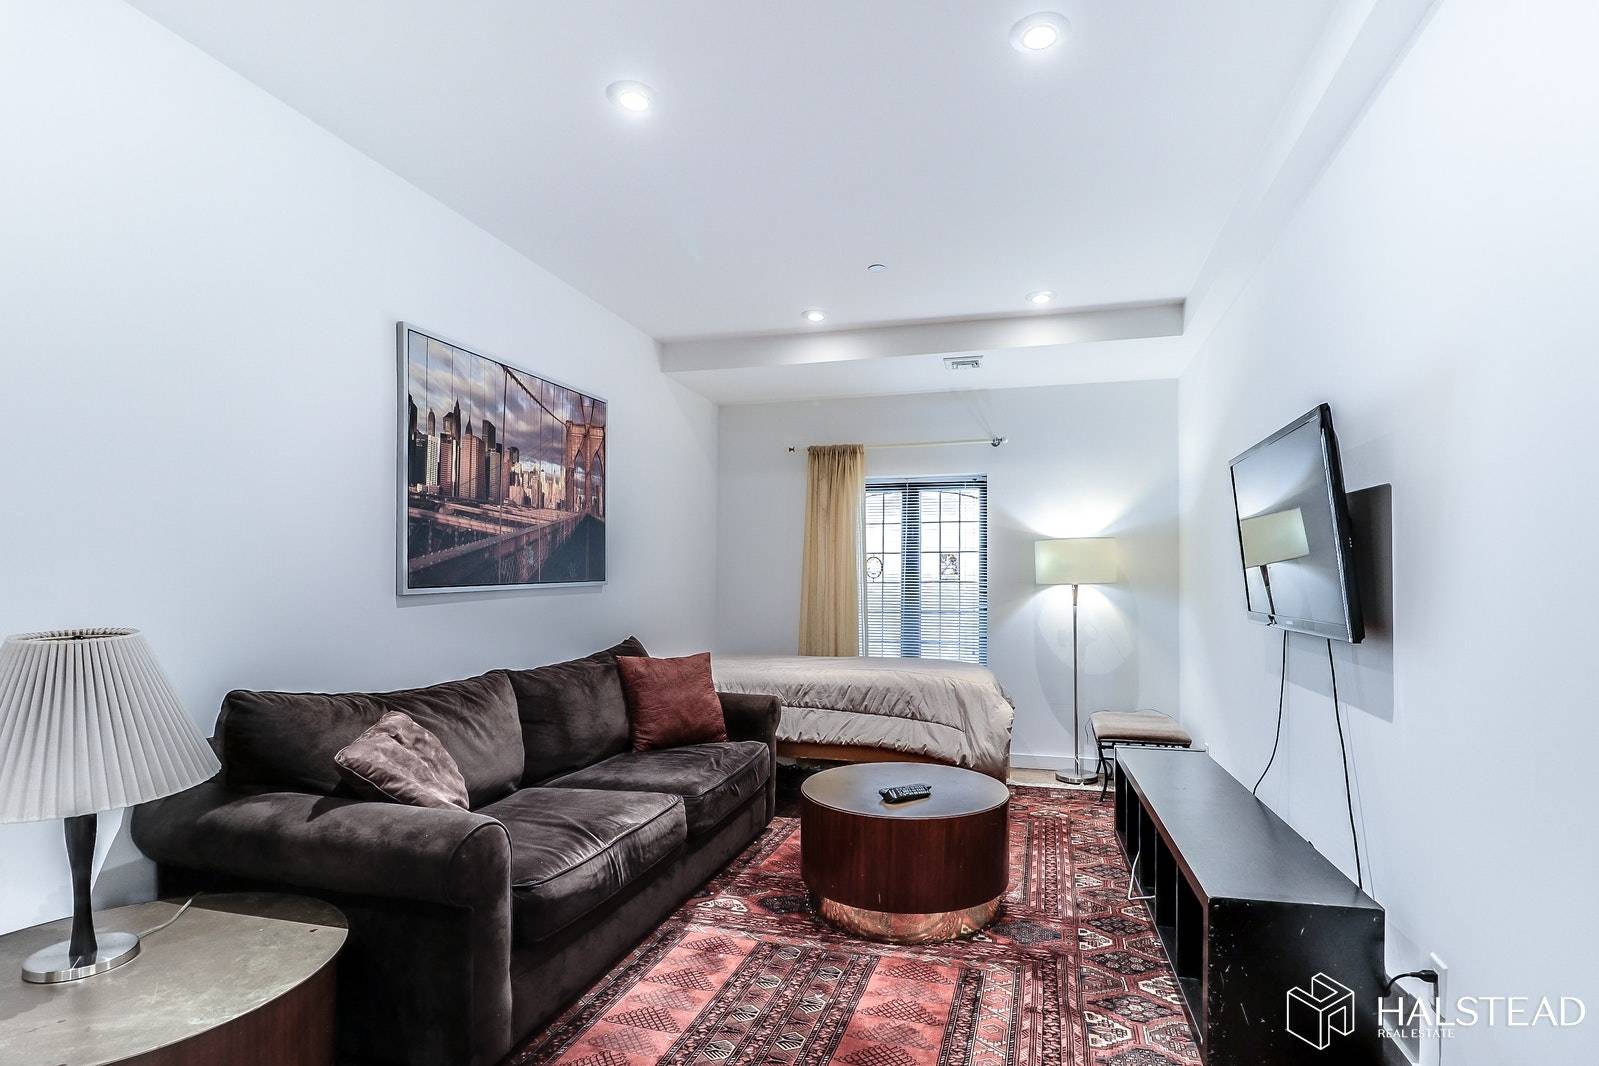 Large newly renovated 1BR in heart of Murray Hill with beautiful hardwood floors throughout and washer dryer in unit.